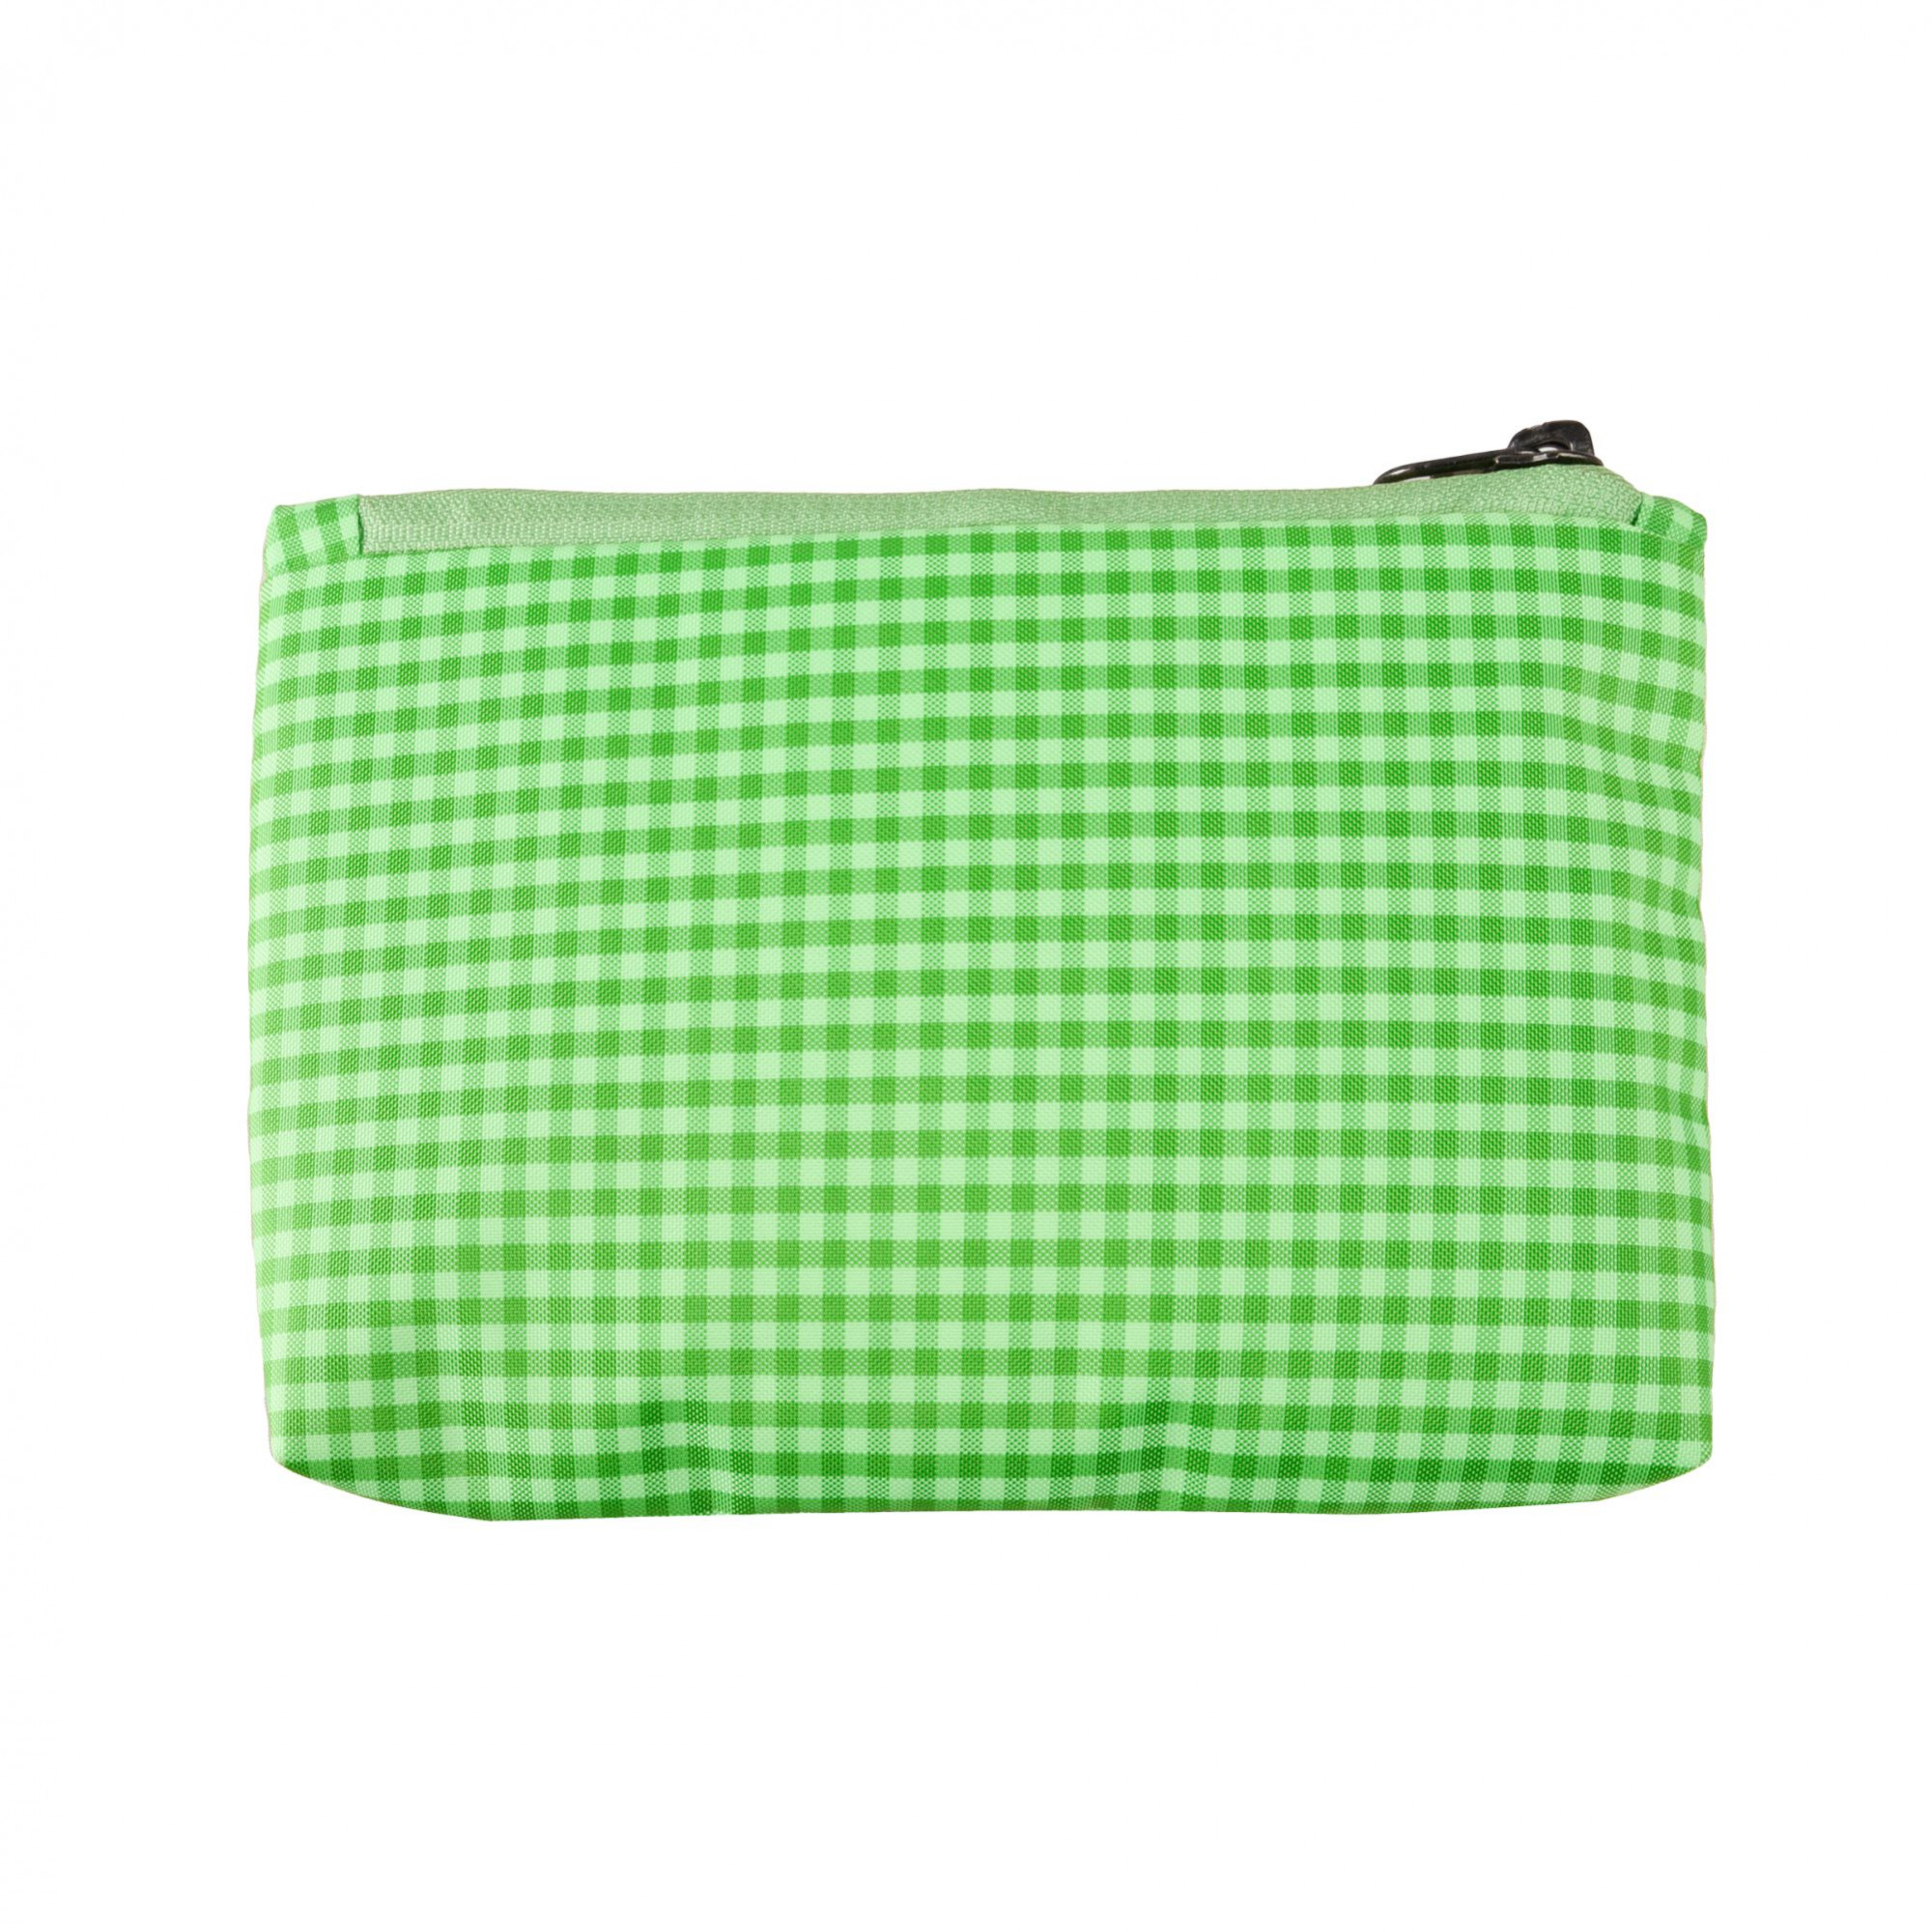 Kuber Industries Pencil Pouch | Square Stationary Pouch | Pen-Pencil Box for Kids | School Geometry Pouch | Pencil Utility Bag | Zipper Pencil Organizer | Green & Blue